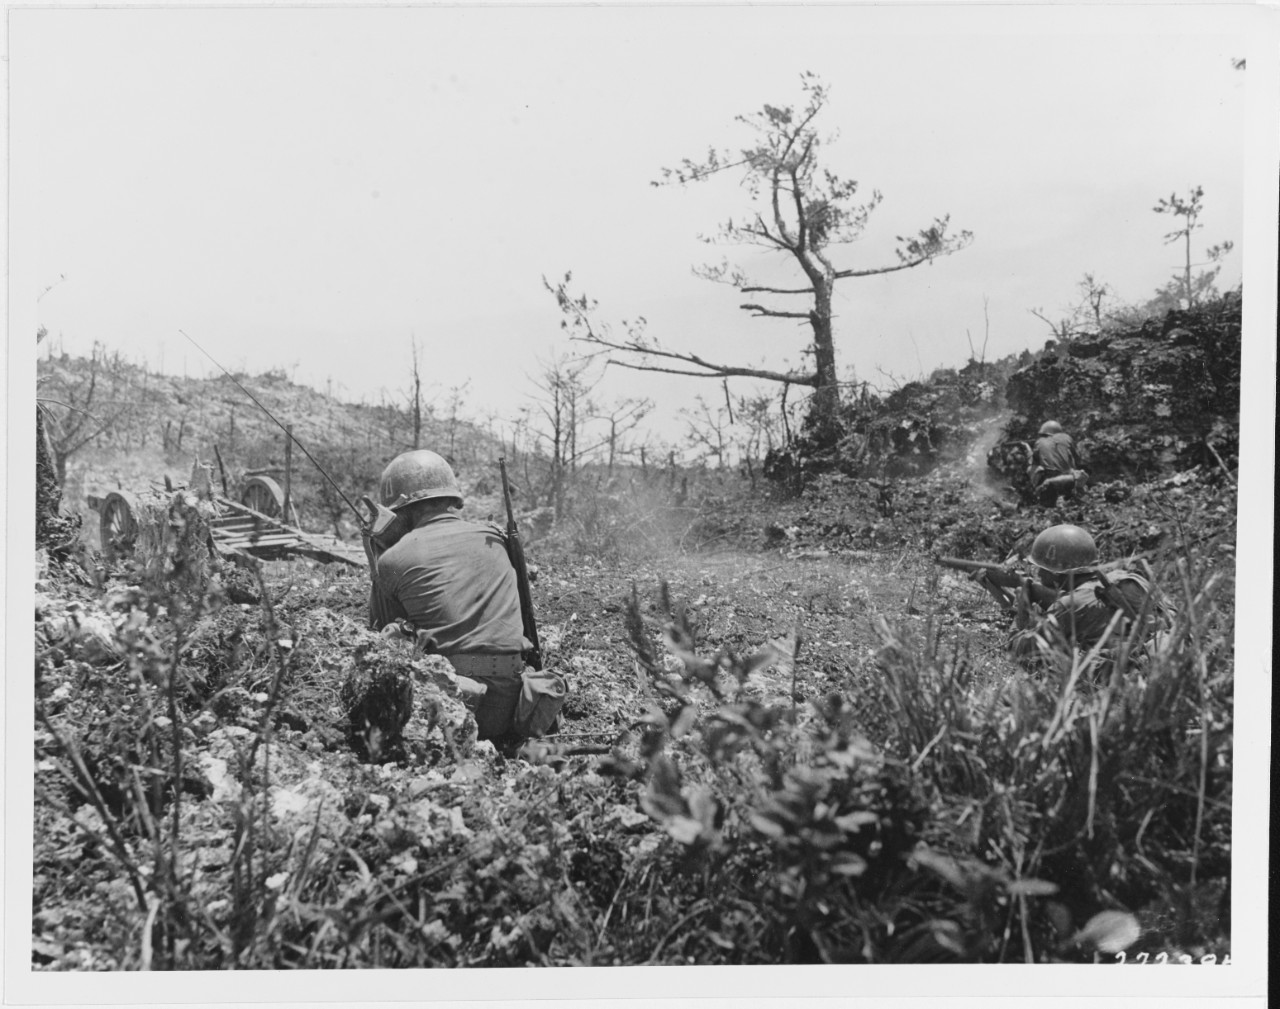 Okinawa, Ryukyus Island. June 20, 1945. The riflemen of the 305th Regiment, 77th Division, fire at a cave